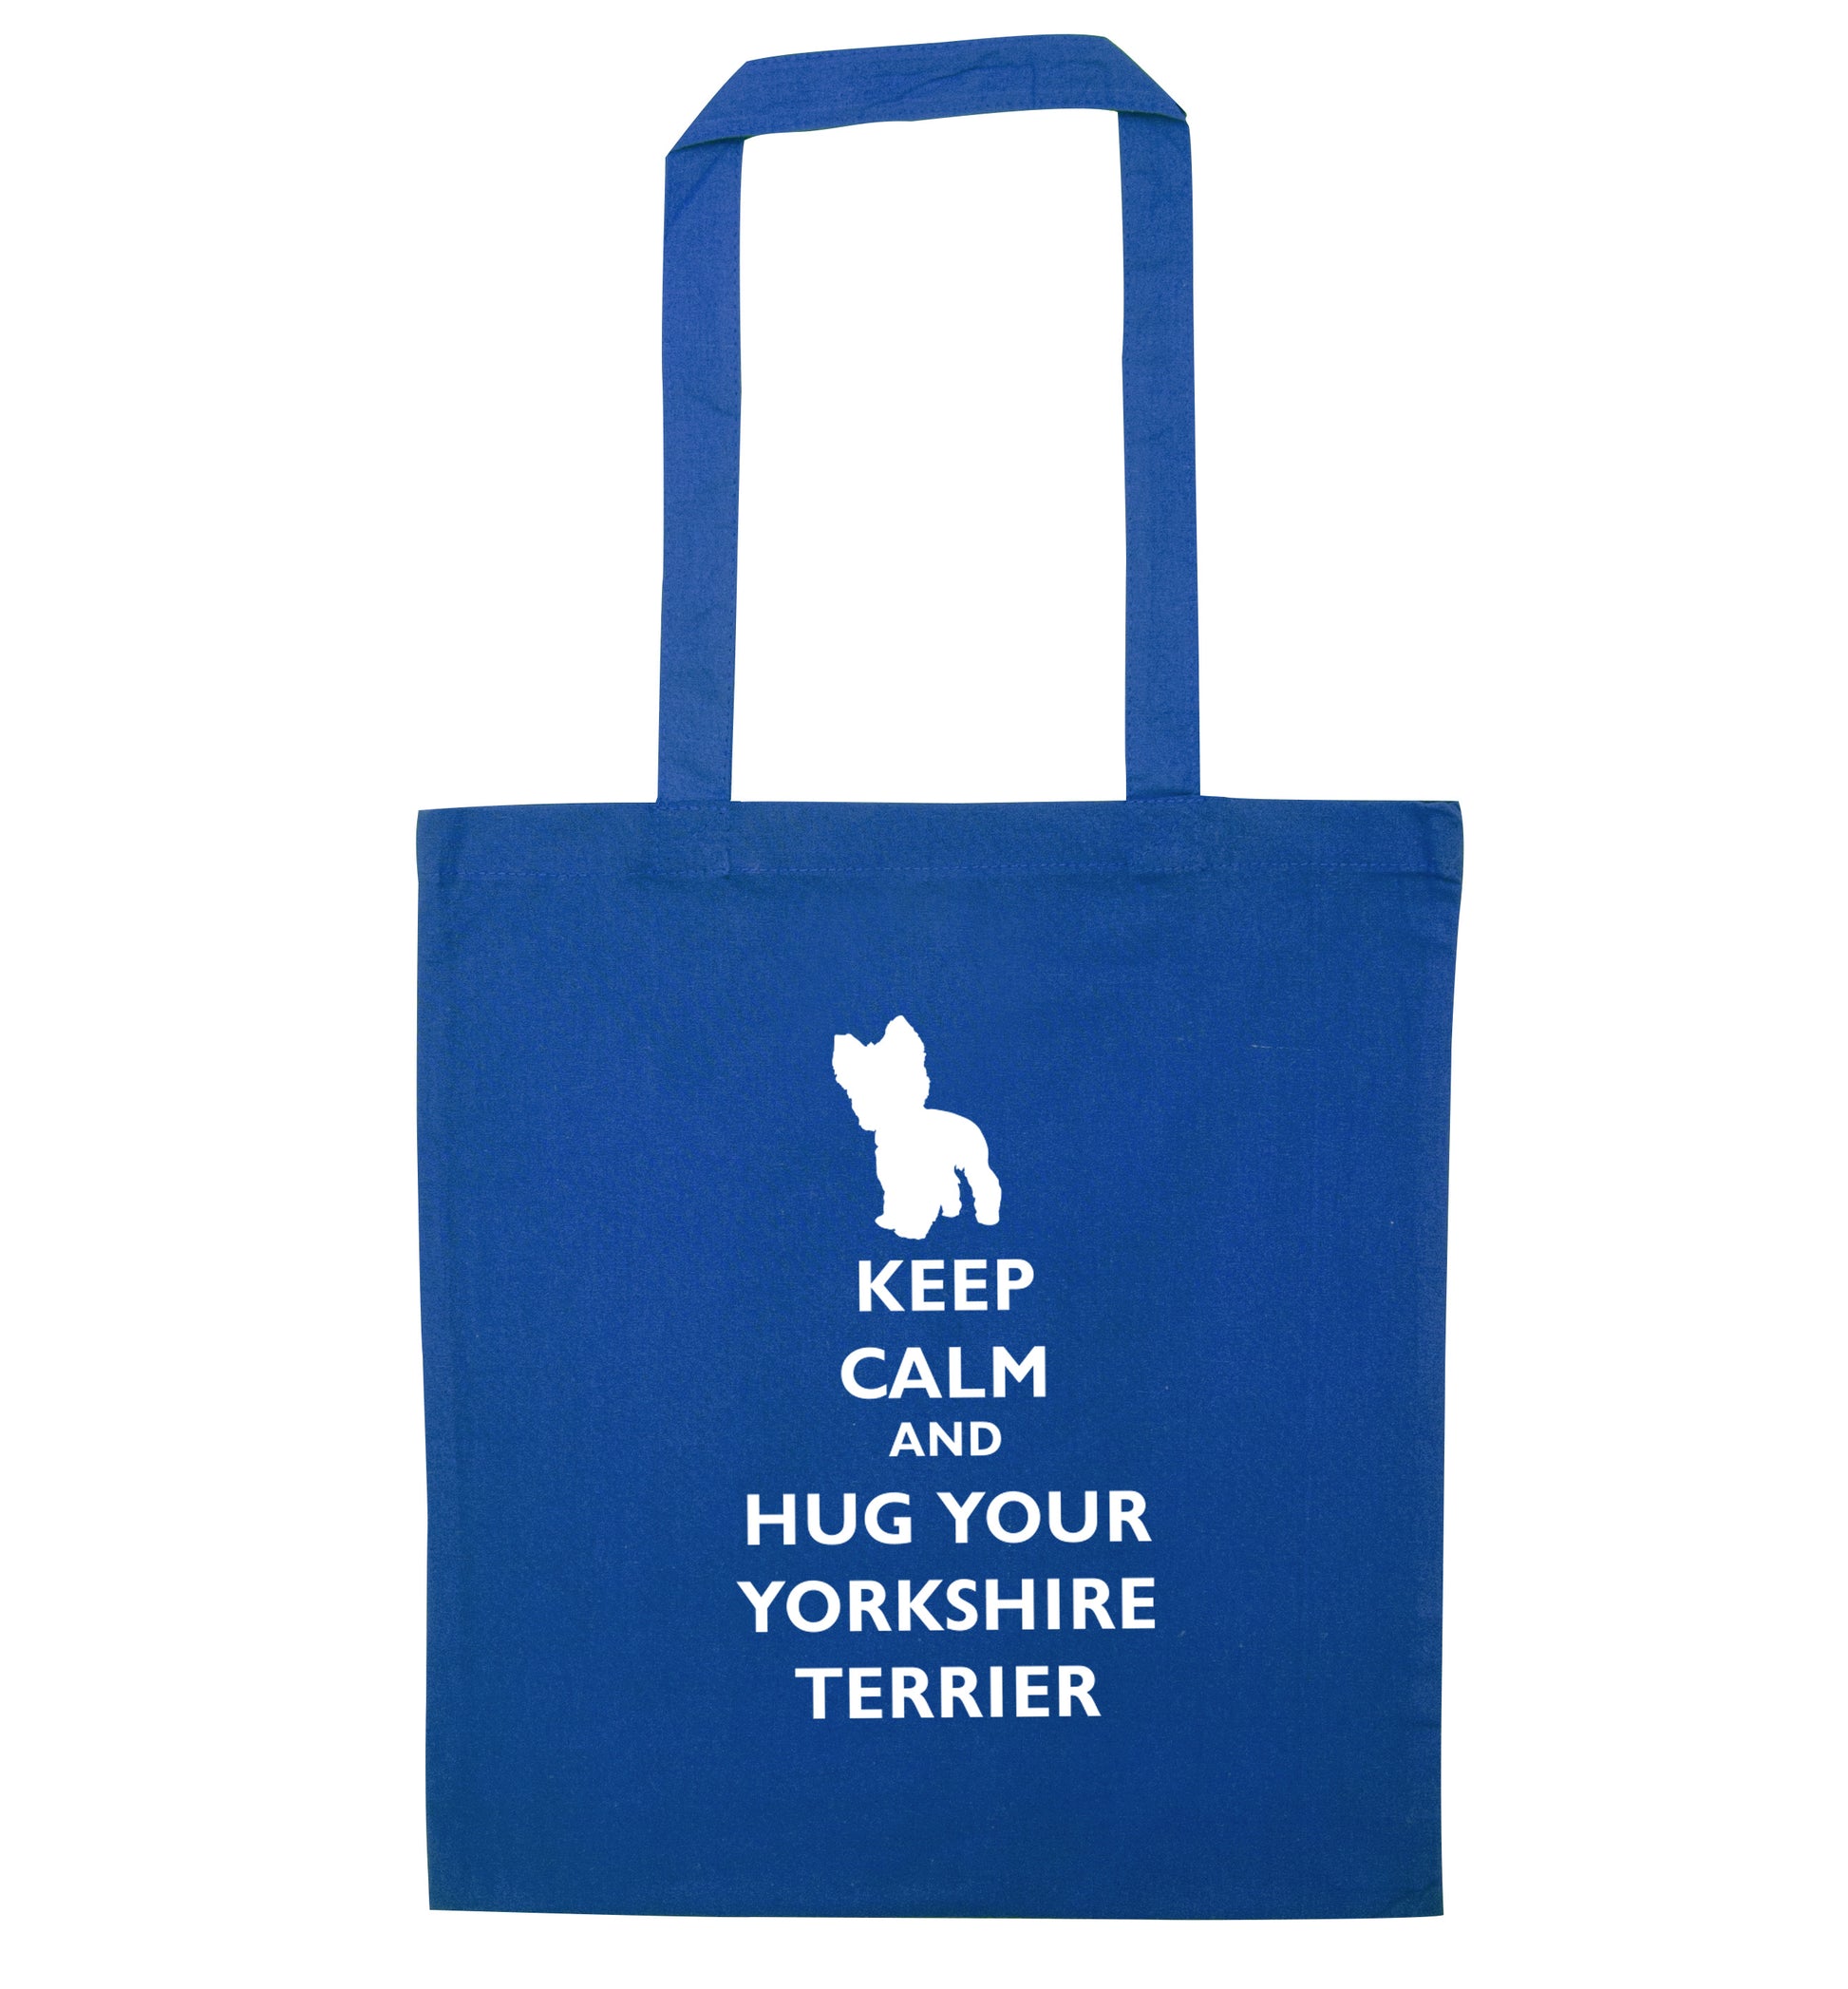 Keep calm and hug your yorkshire terrier blue tote bag